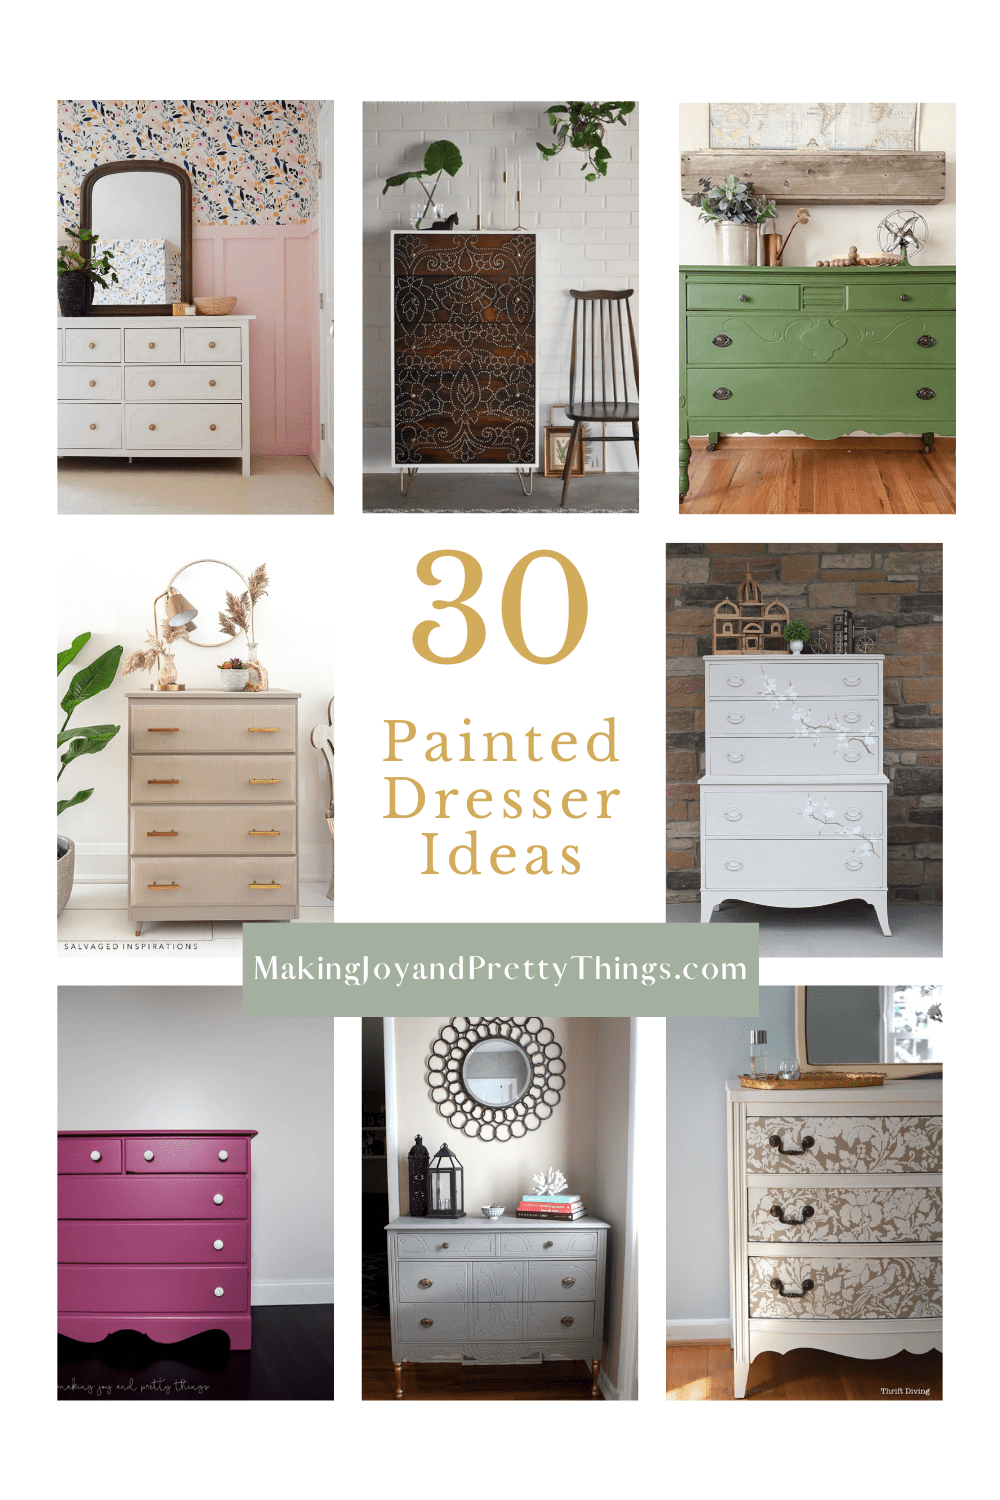 Get inspired for your next furniture makeover project with this round up of 30 painted dresser ideas!